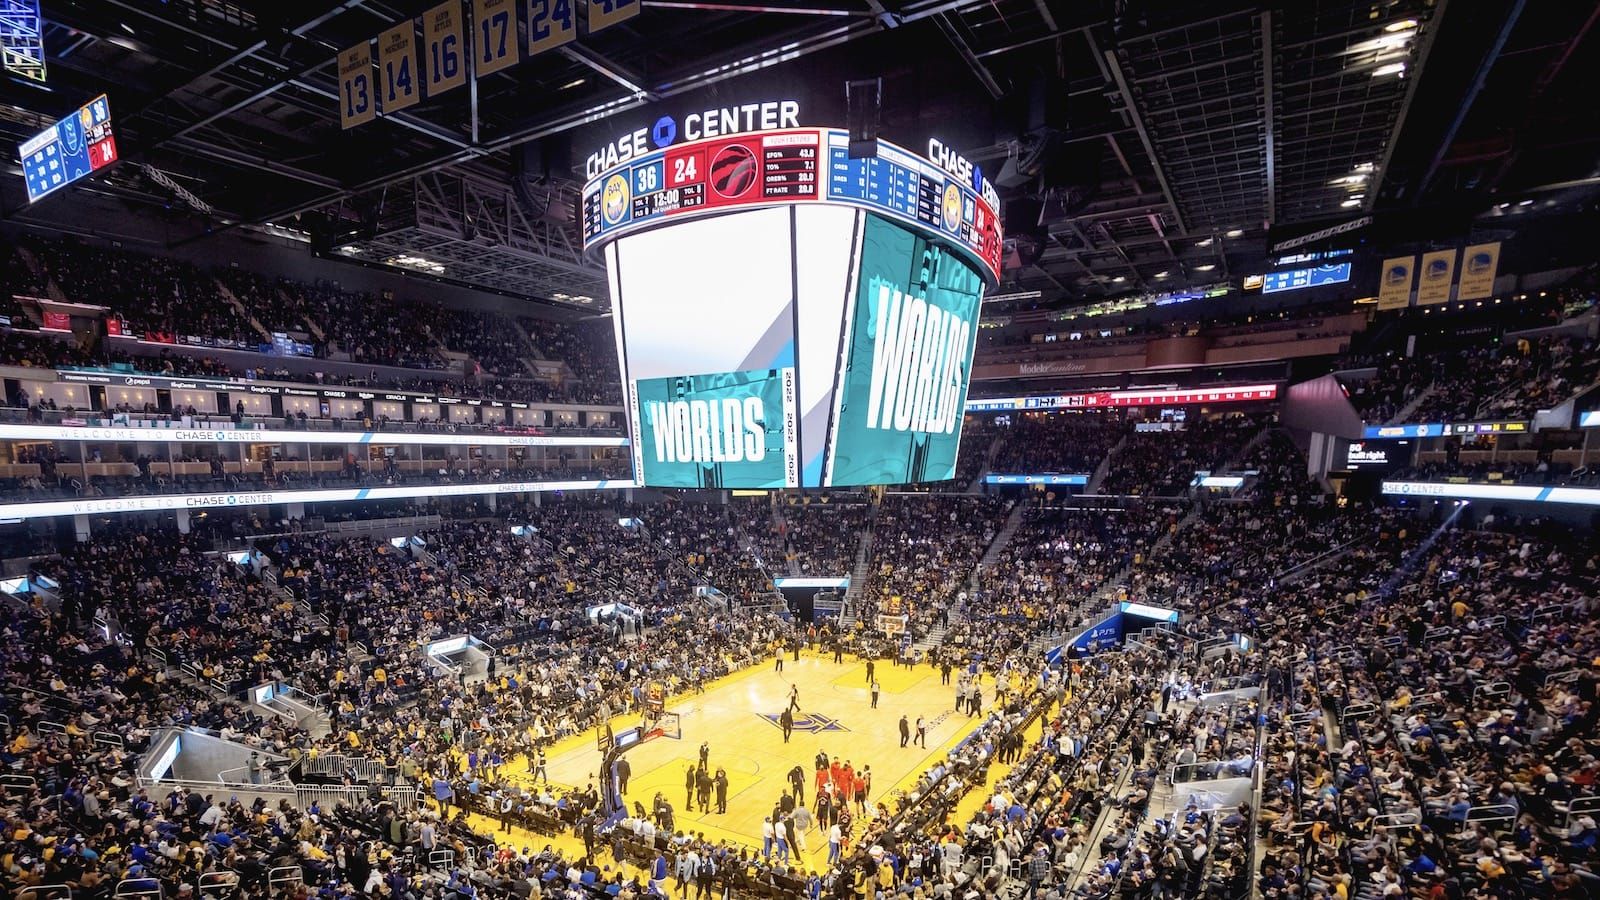 view from above of the Golden State Warriors basketball court with "Worlds" written on the giant scoreboard